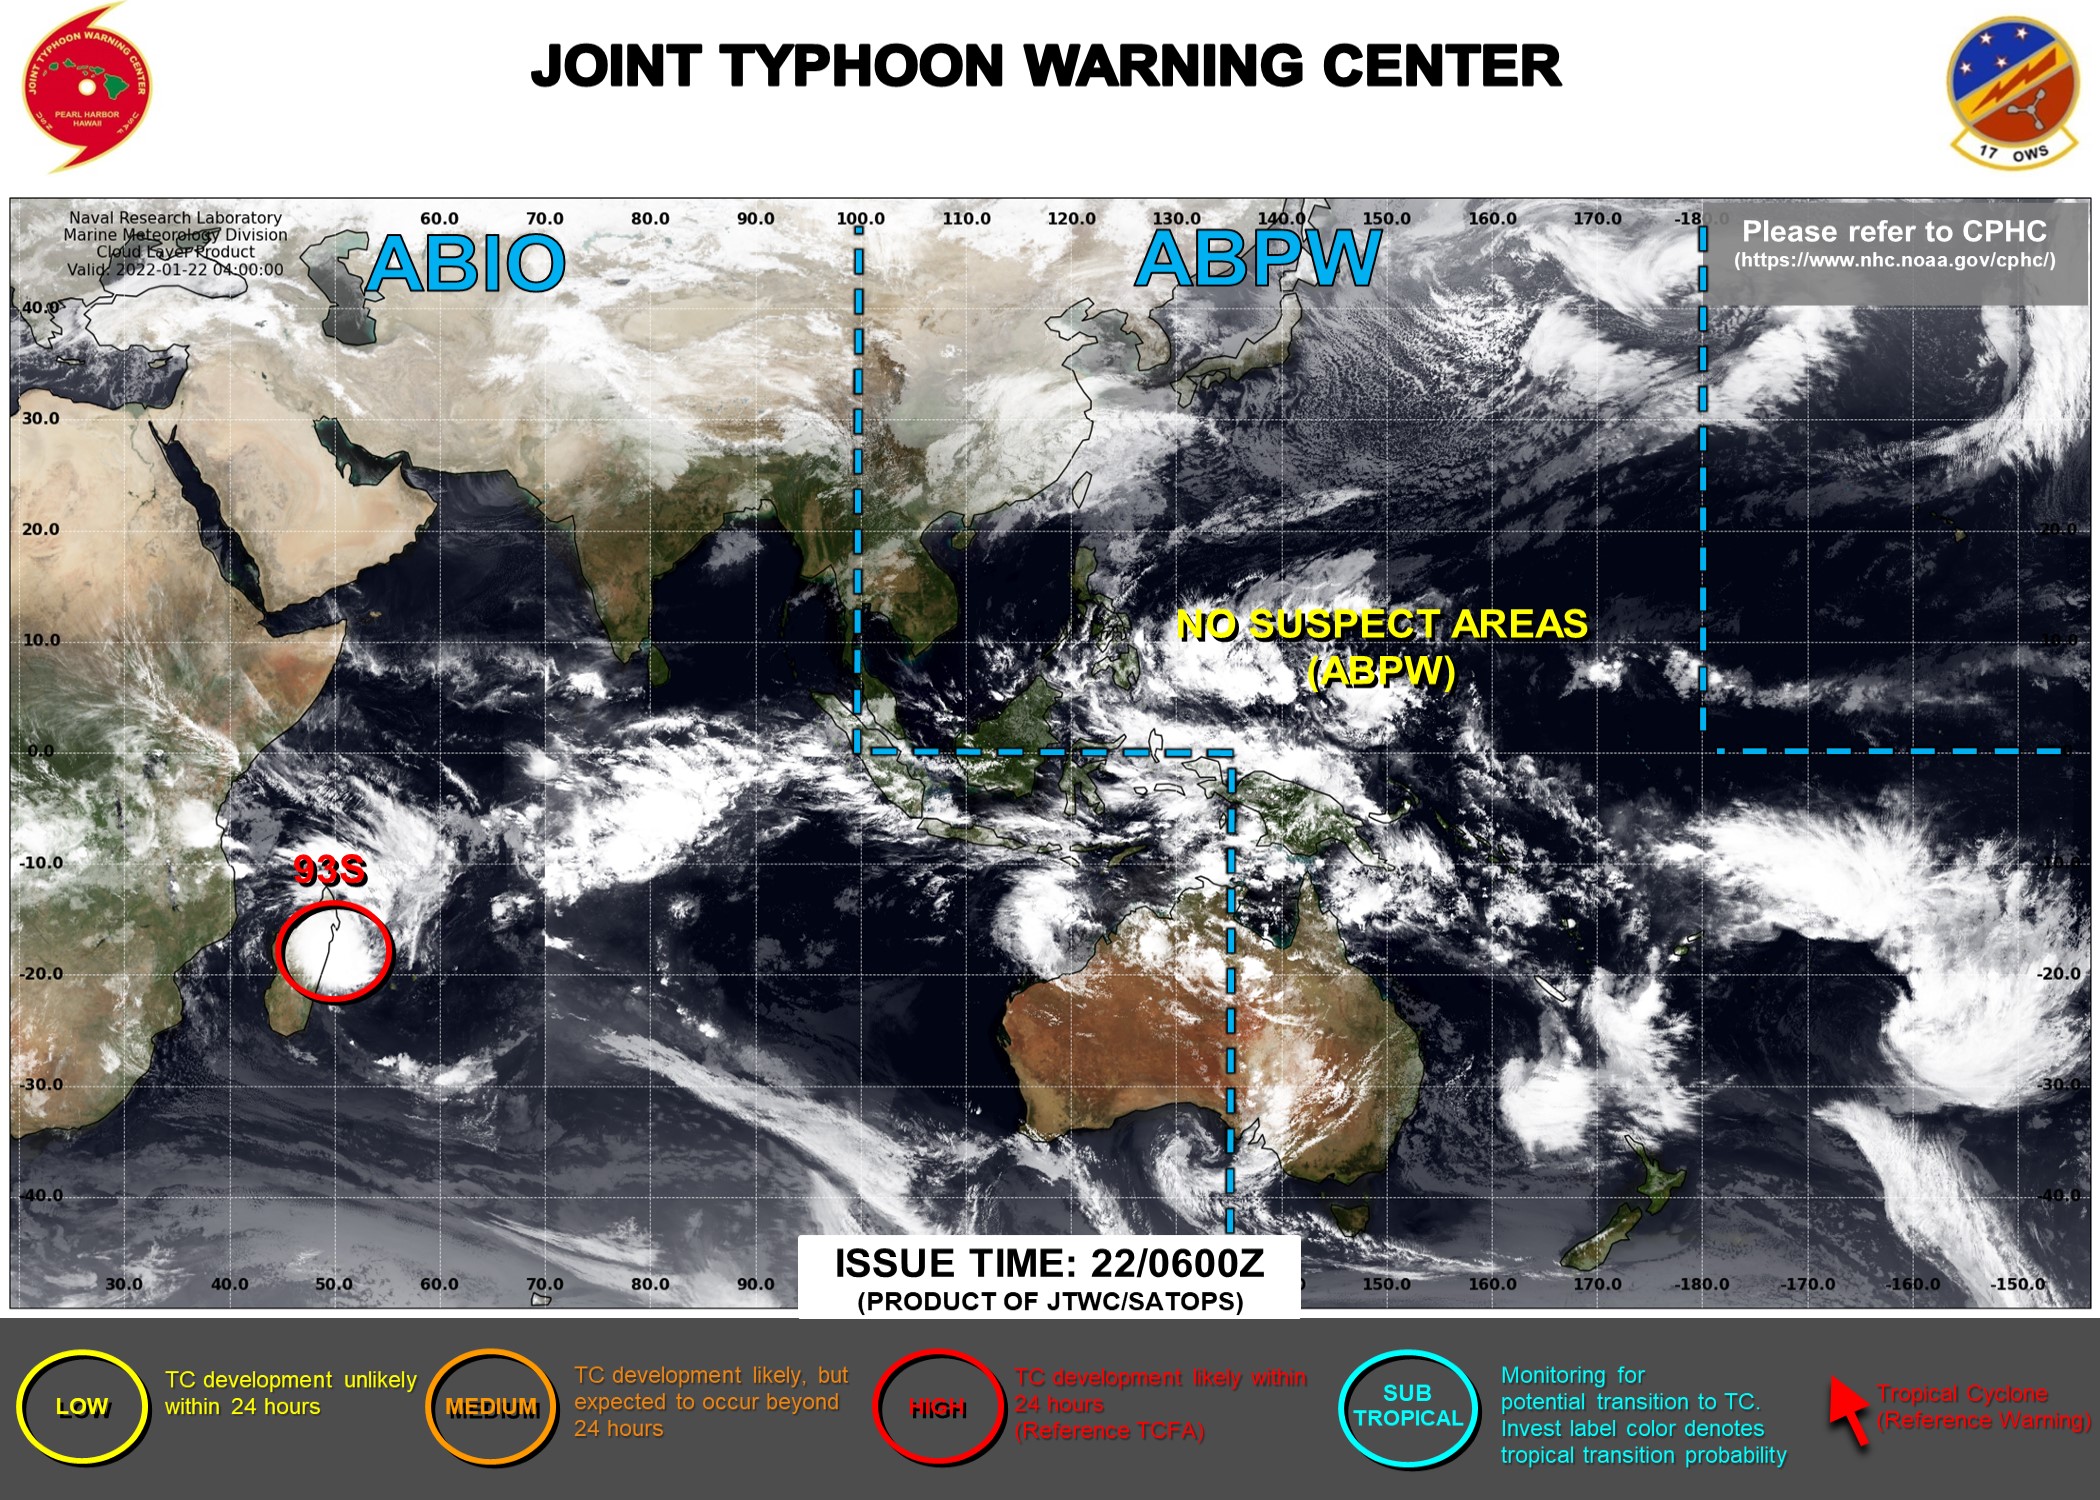 Tropical Cyclone Formation Alert re-issued for Invest 93S, 22/02utc